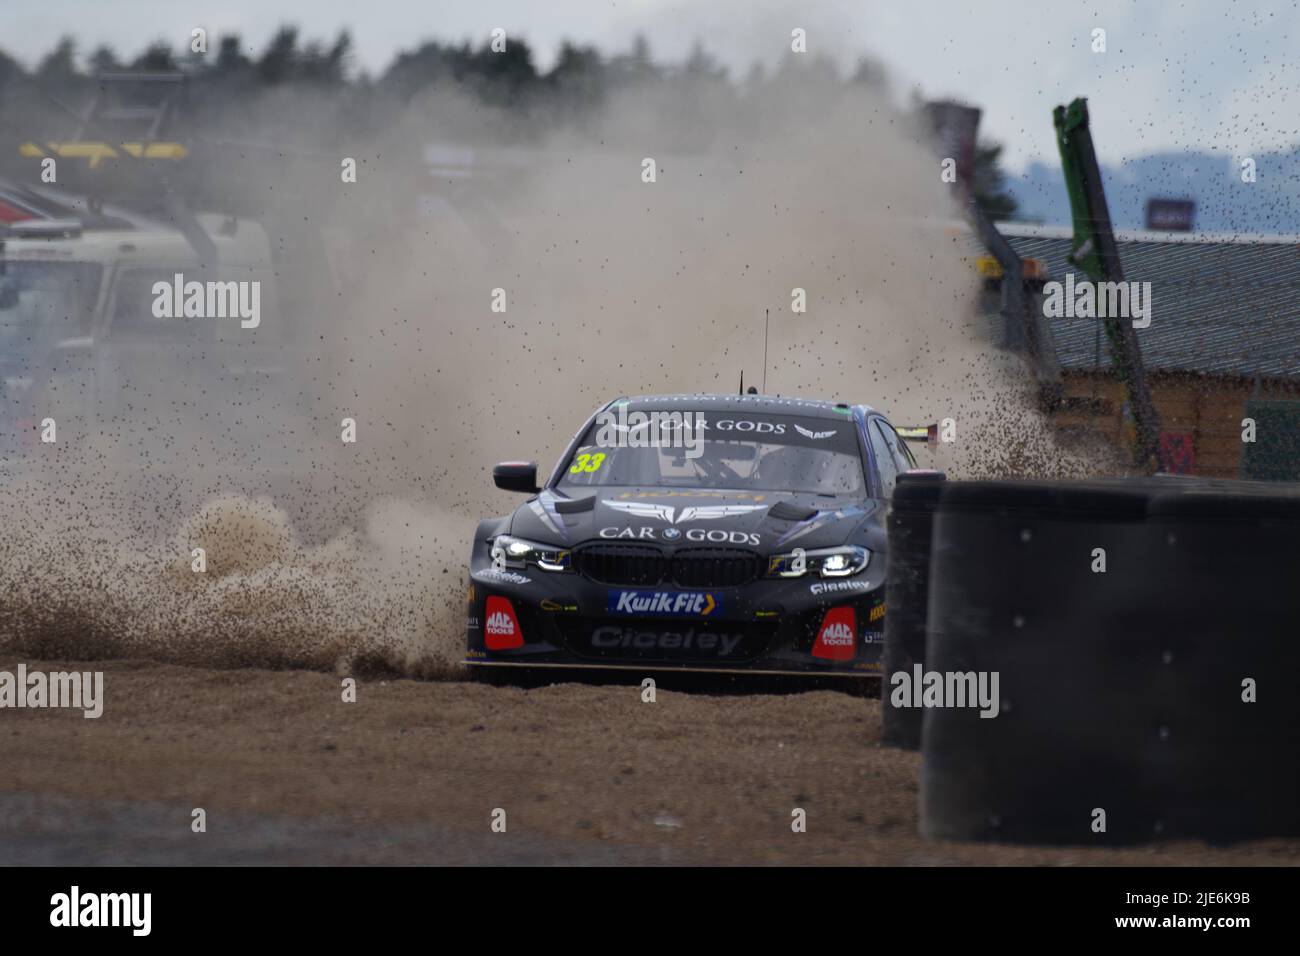 Croft, England, 25 Jun 2022. Adam Morgan driving a BMW 330e M Sport for Car Gods with Ciceley Motorsport paying a visit to the gravel trap during qualification for the Kwik Fit British Touring Car Championship. Credit: Colin Edwards/Alamy Live News Stock Photo